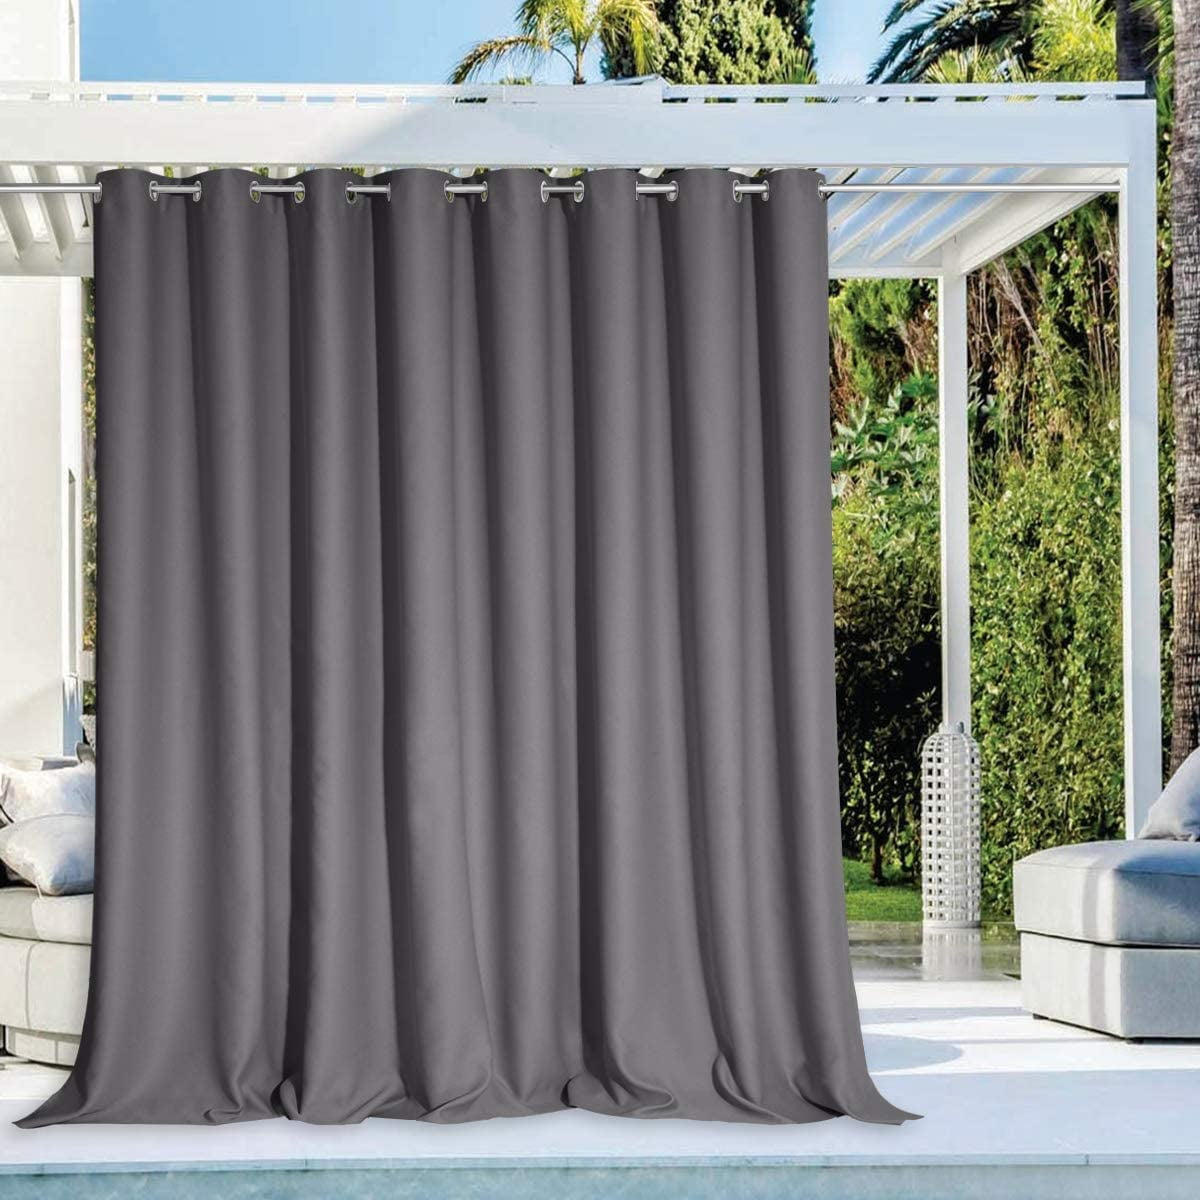 Waterproof UV Privacy Outdoor/Indoor Window Curtains Panel for Blackout